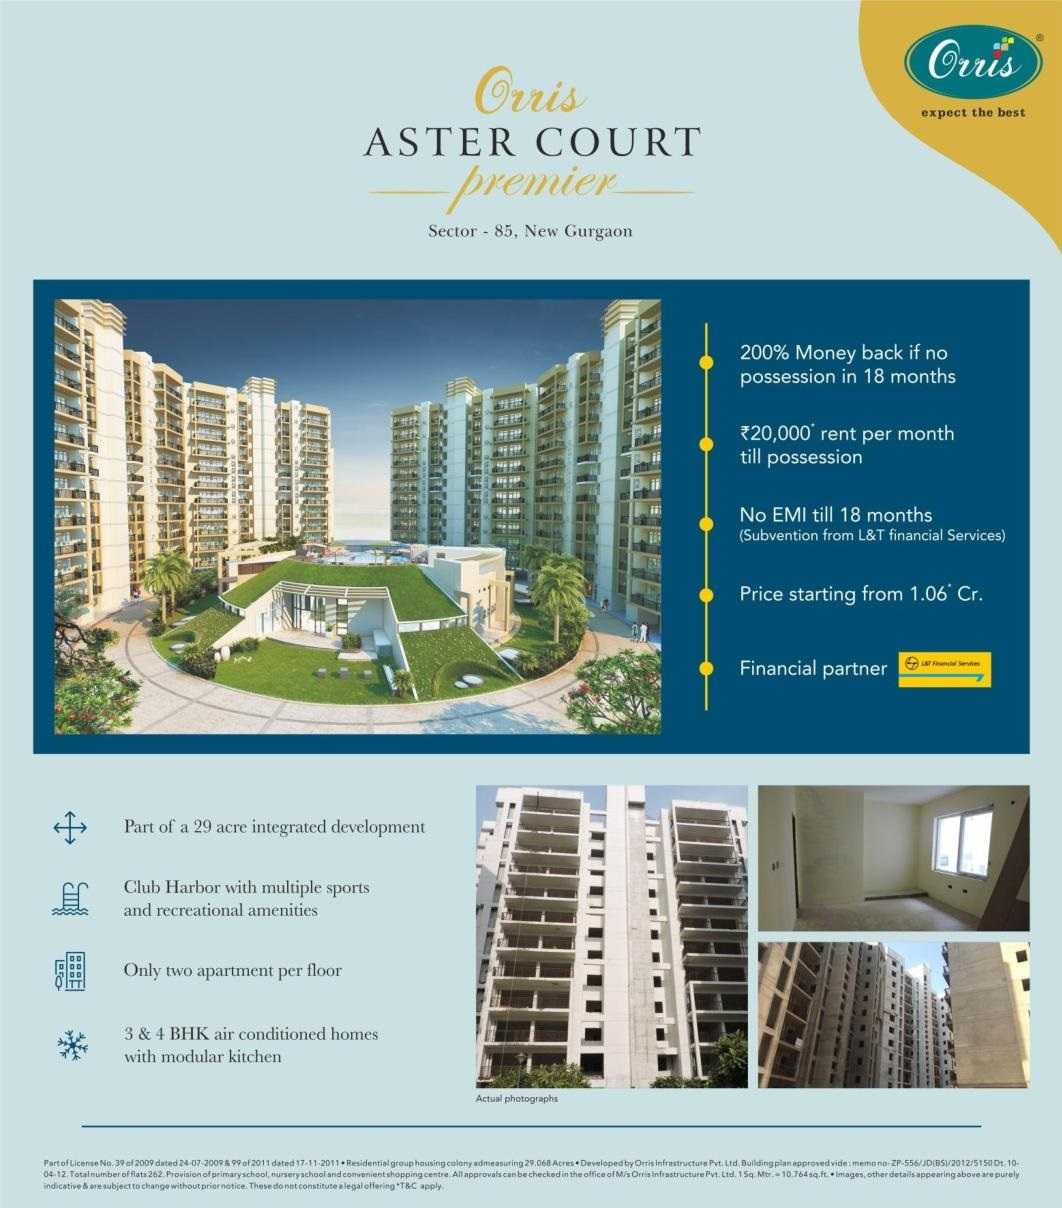 Book home with no EMI till 18 months at Orris Aster Court Premier in Gurgaon Update